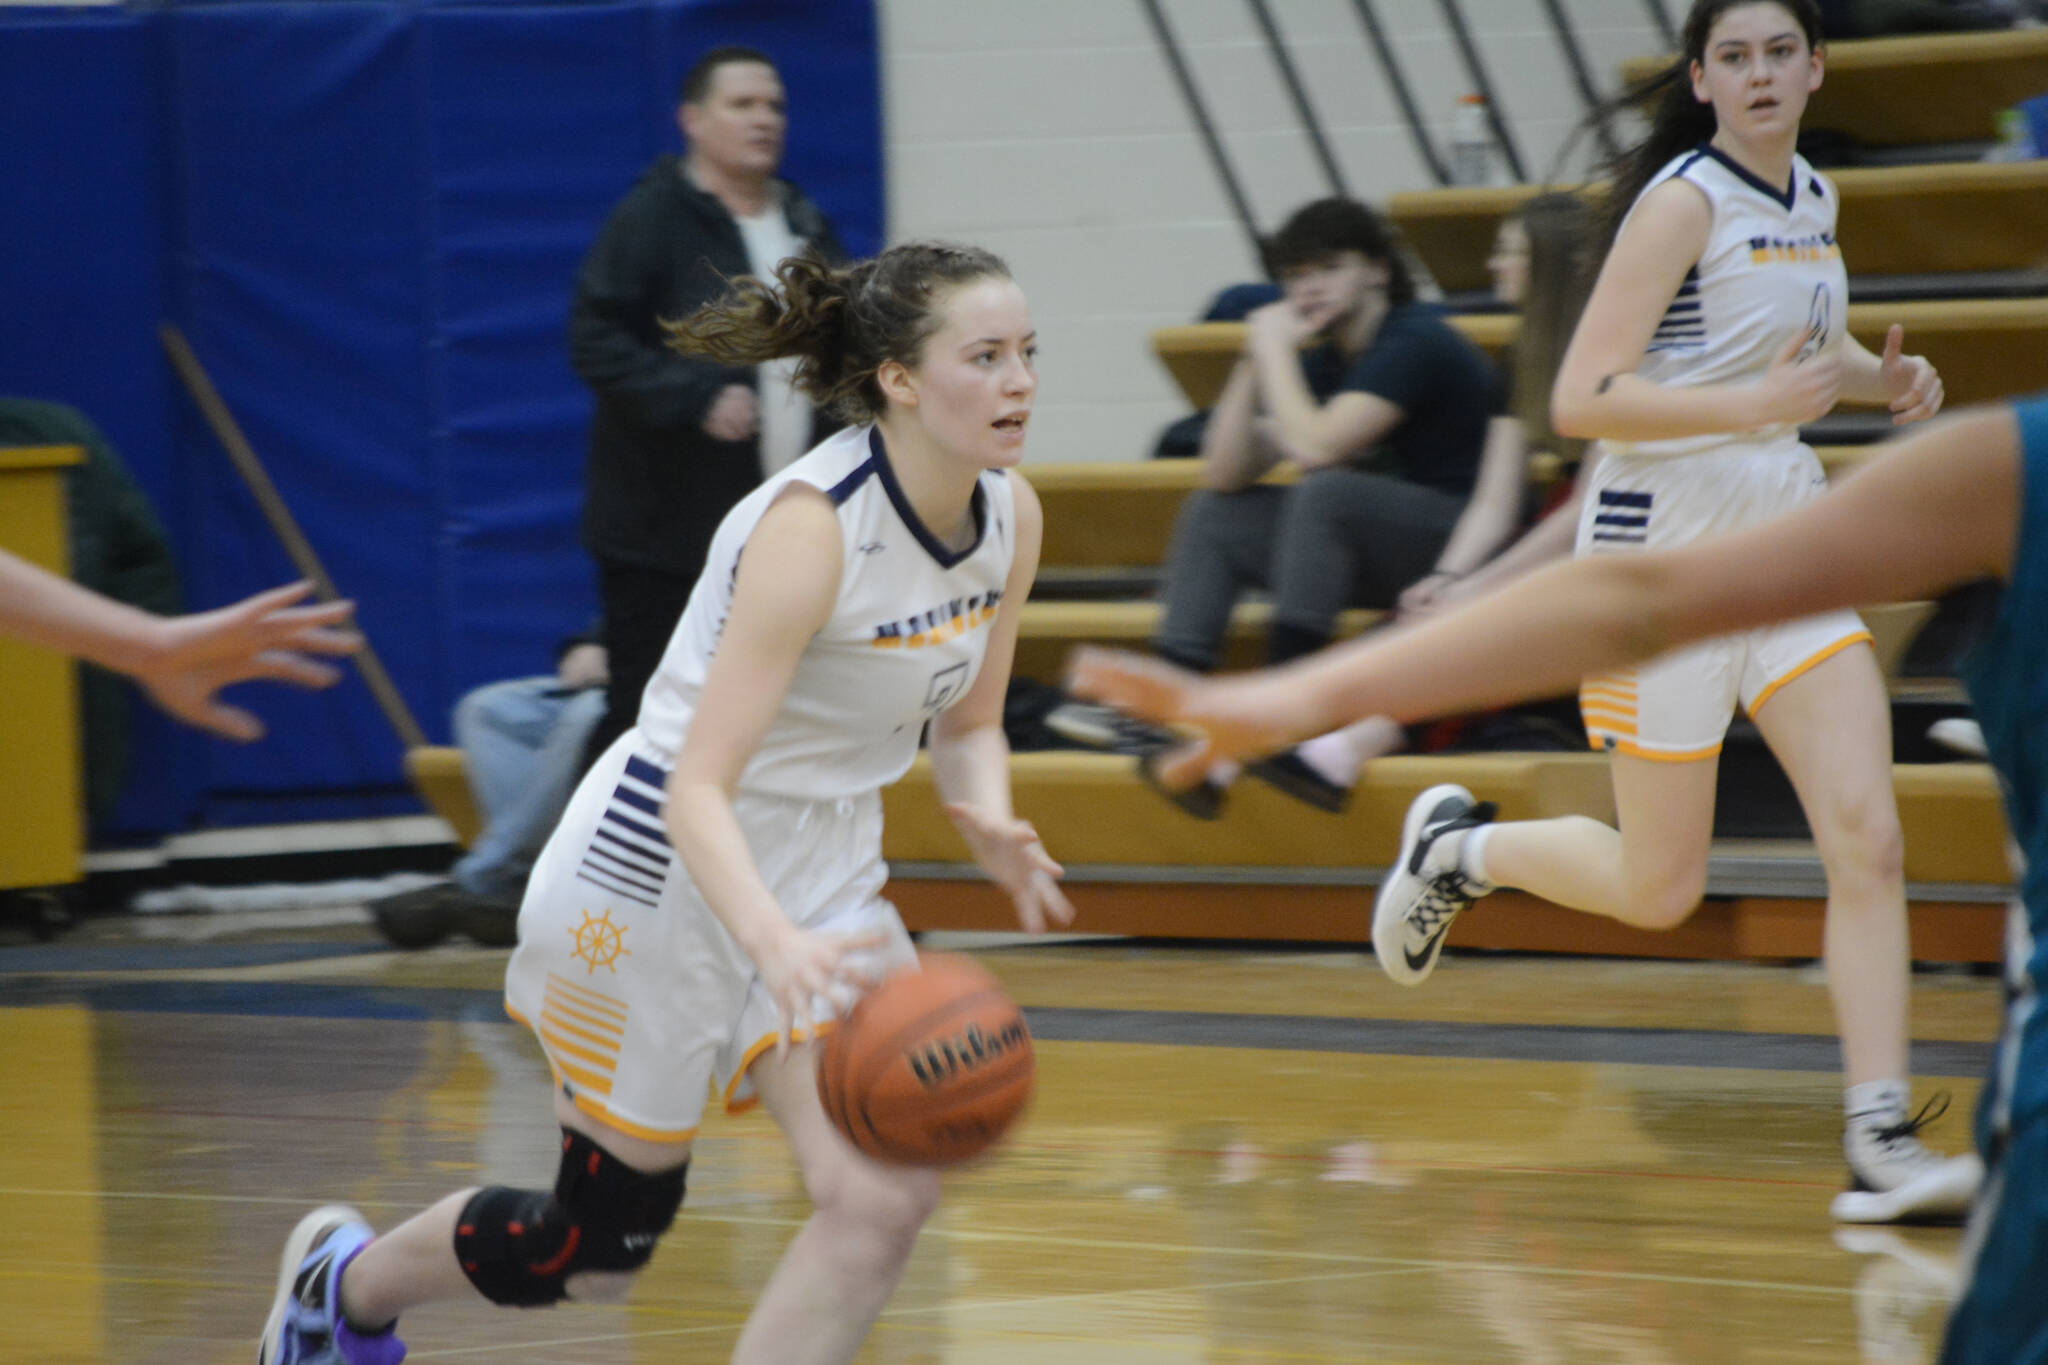 Lady Mariner Kaylin Anderson drives the ball down the court against the Lady Bulldogs during Senior Night on Friday, Feb. 25, 2022, at the Alice Witte Gym at Homer High School in Homer, Alaska. (Photo by Michael Armstrong/Homer News)